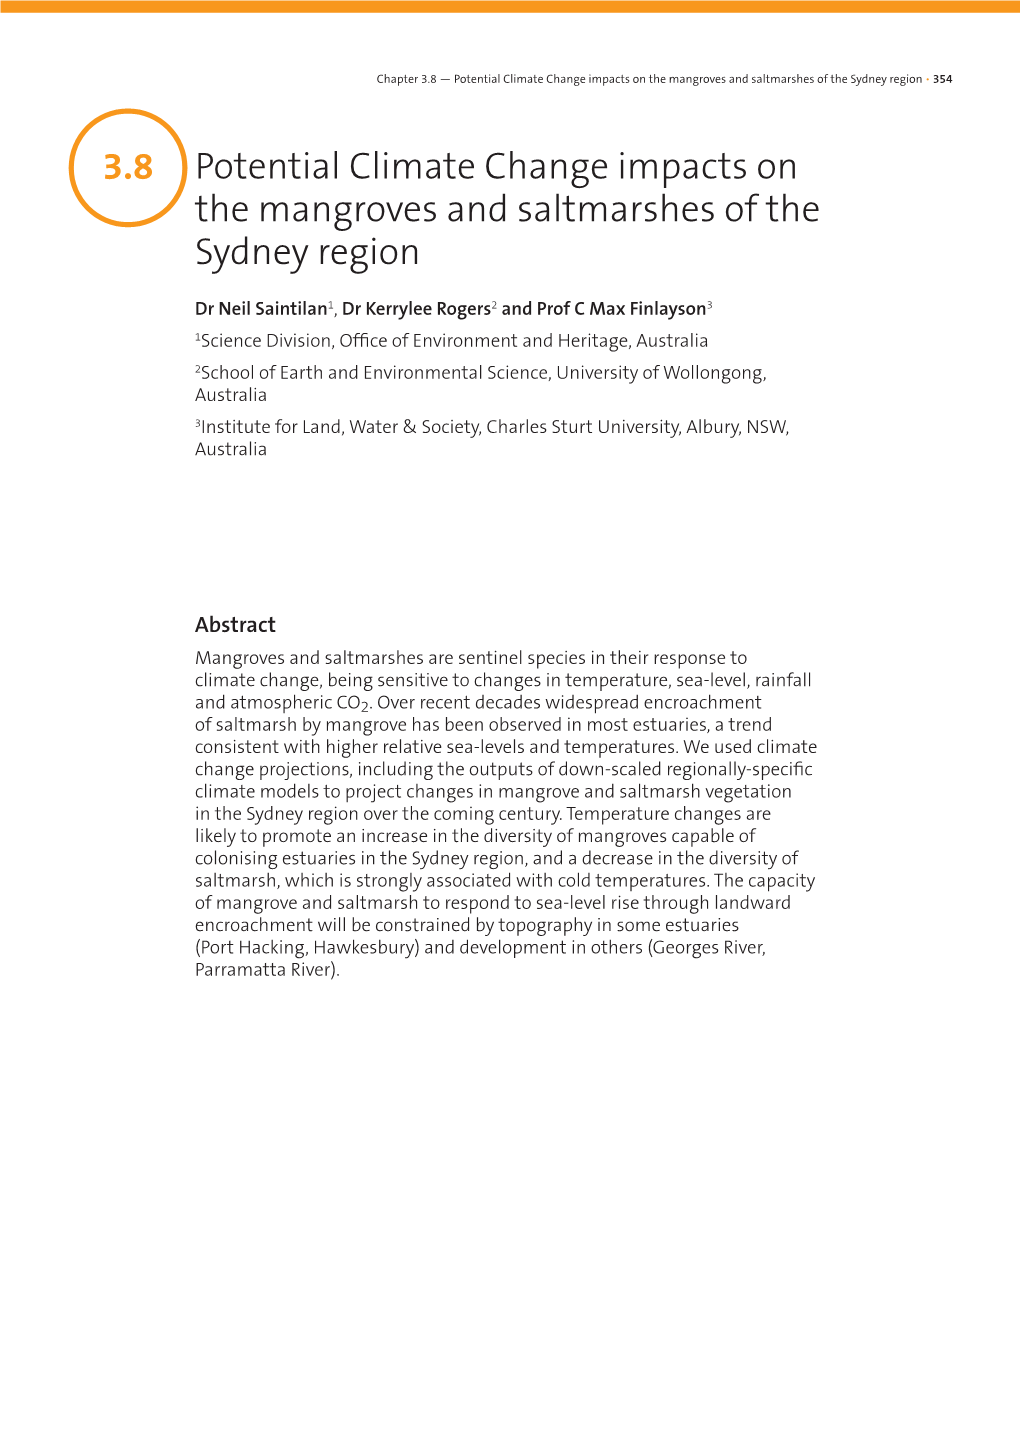 3.8 Potential Climate Change Impacts on the Mangroves and Saltmarshes of the Sydney Region